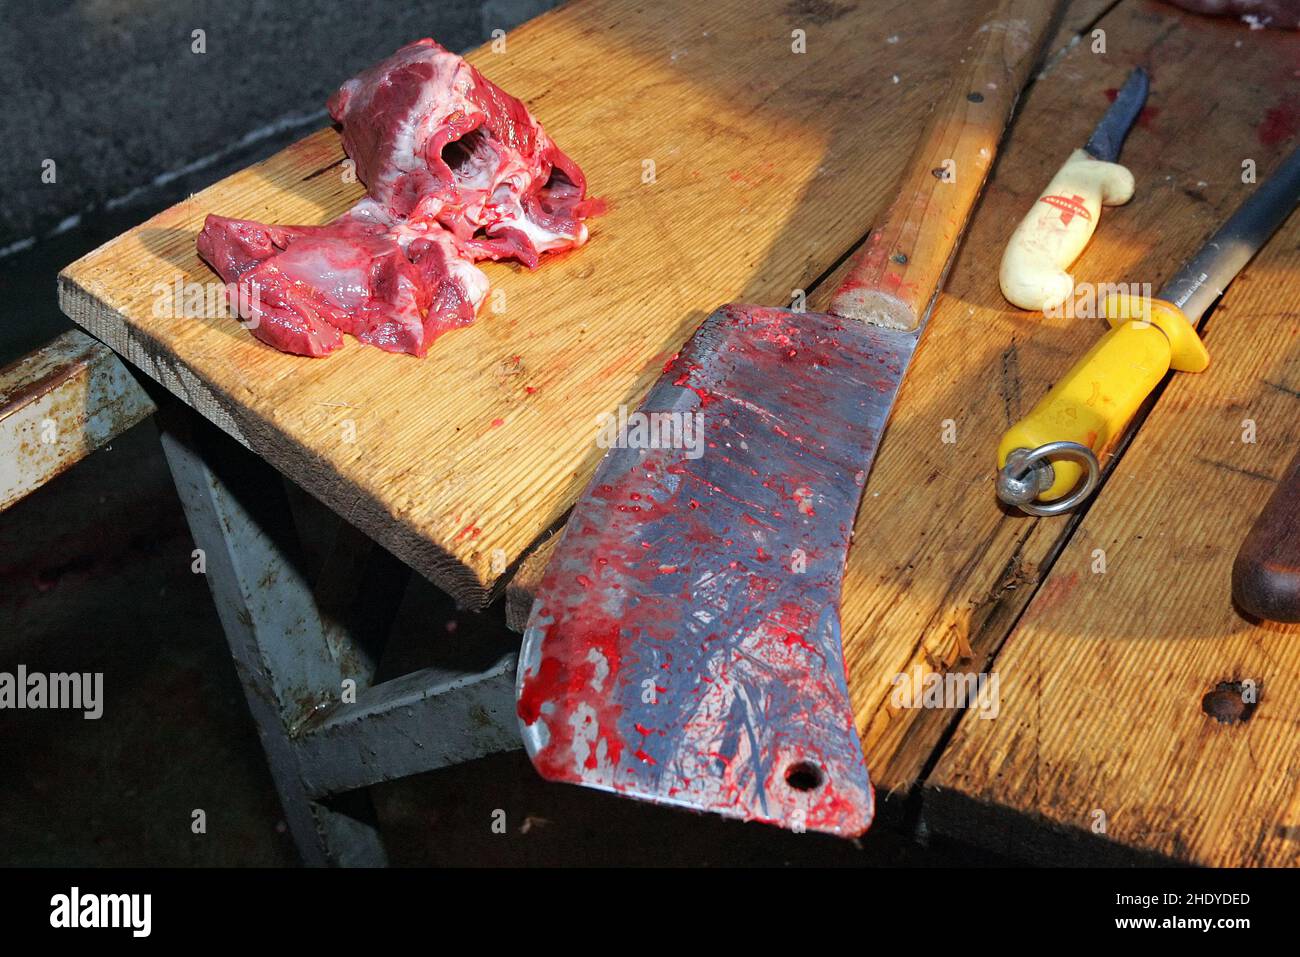 tool, slaughtering, tools Stock Photo